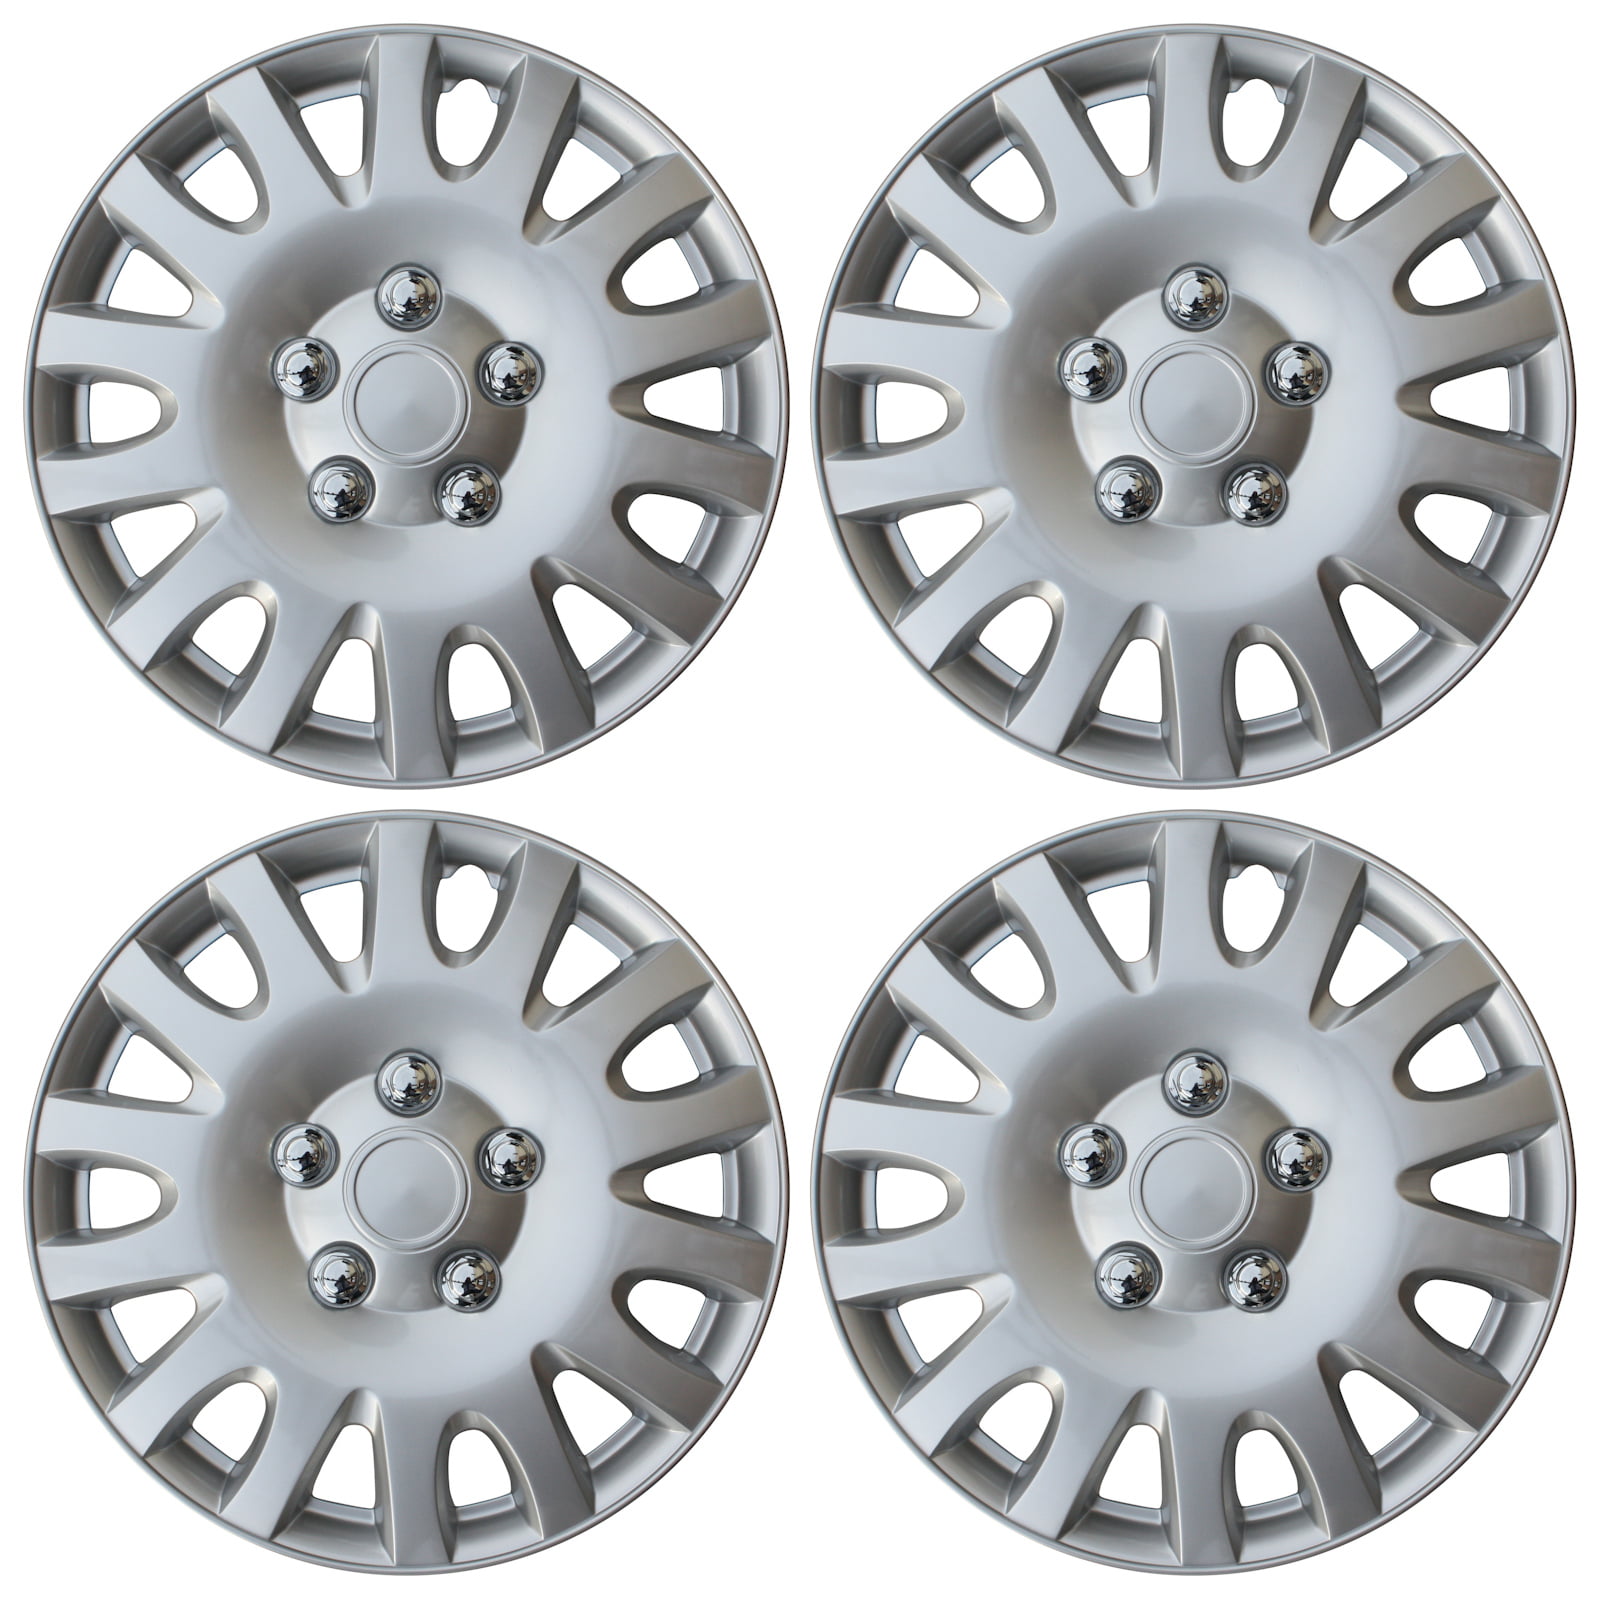 4PC Set 14 inch Silver Hubcap Wheel Cover OEM Replacement Full Lug Skin Durable 